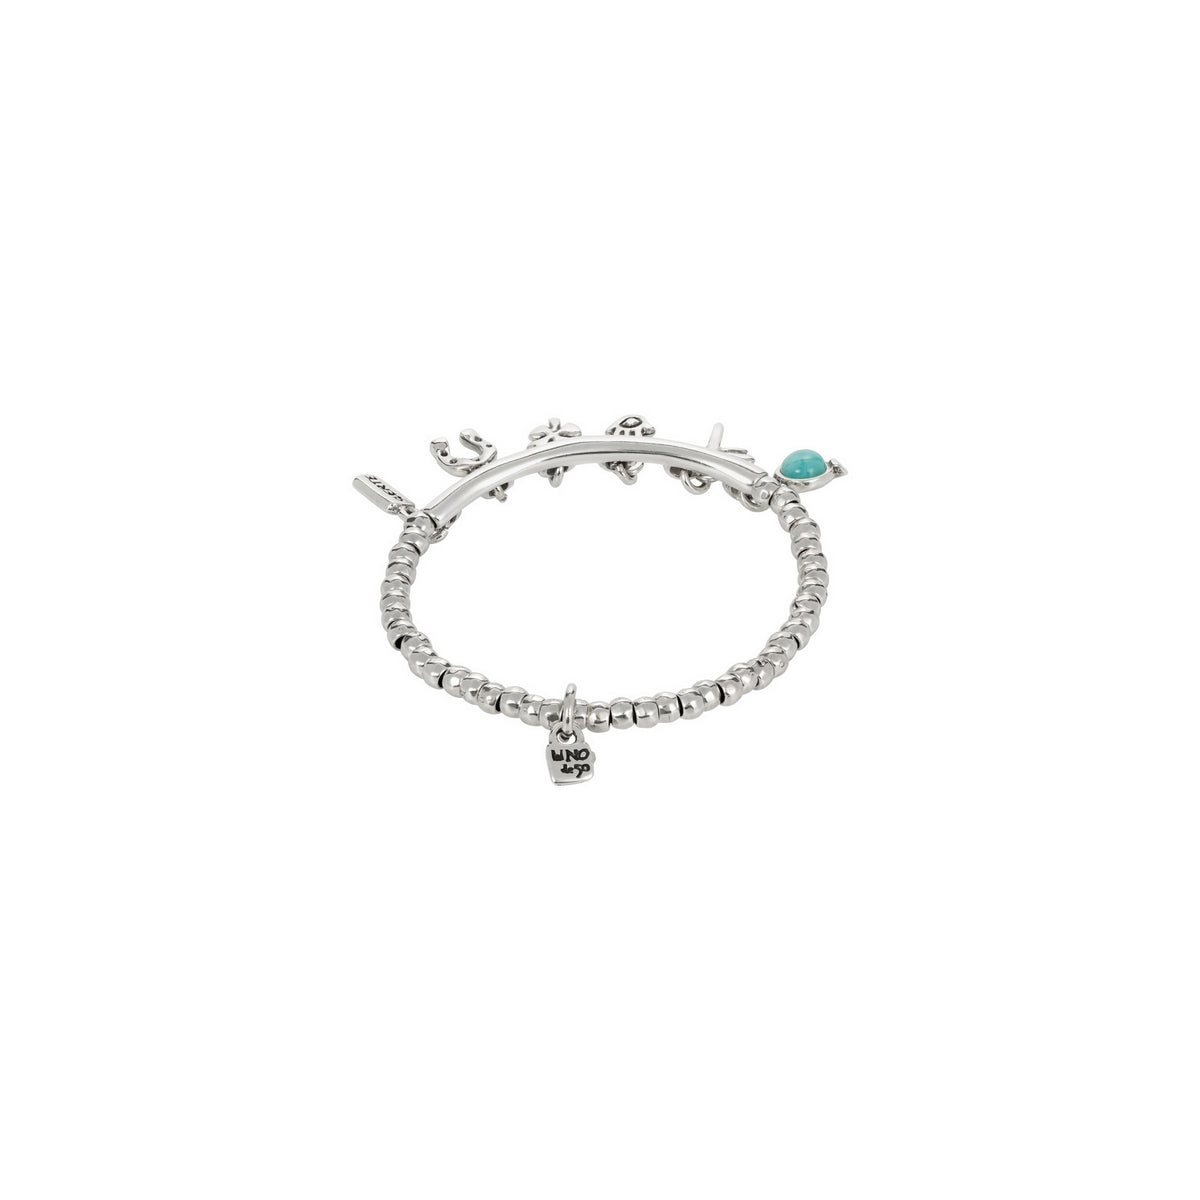 uno de 50 luckykeys elastic silver-plated metal alloy bracelet, tubule, amazonite, dragonfly, hand, clover, etc charms